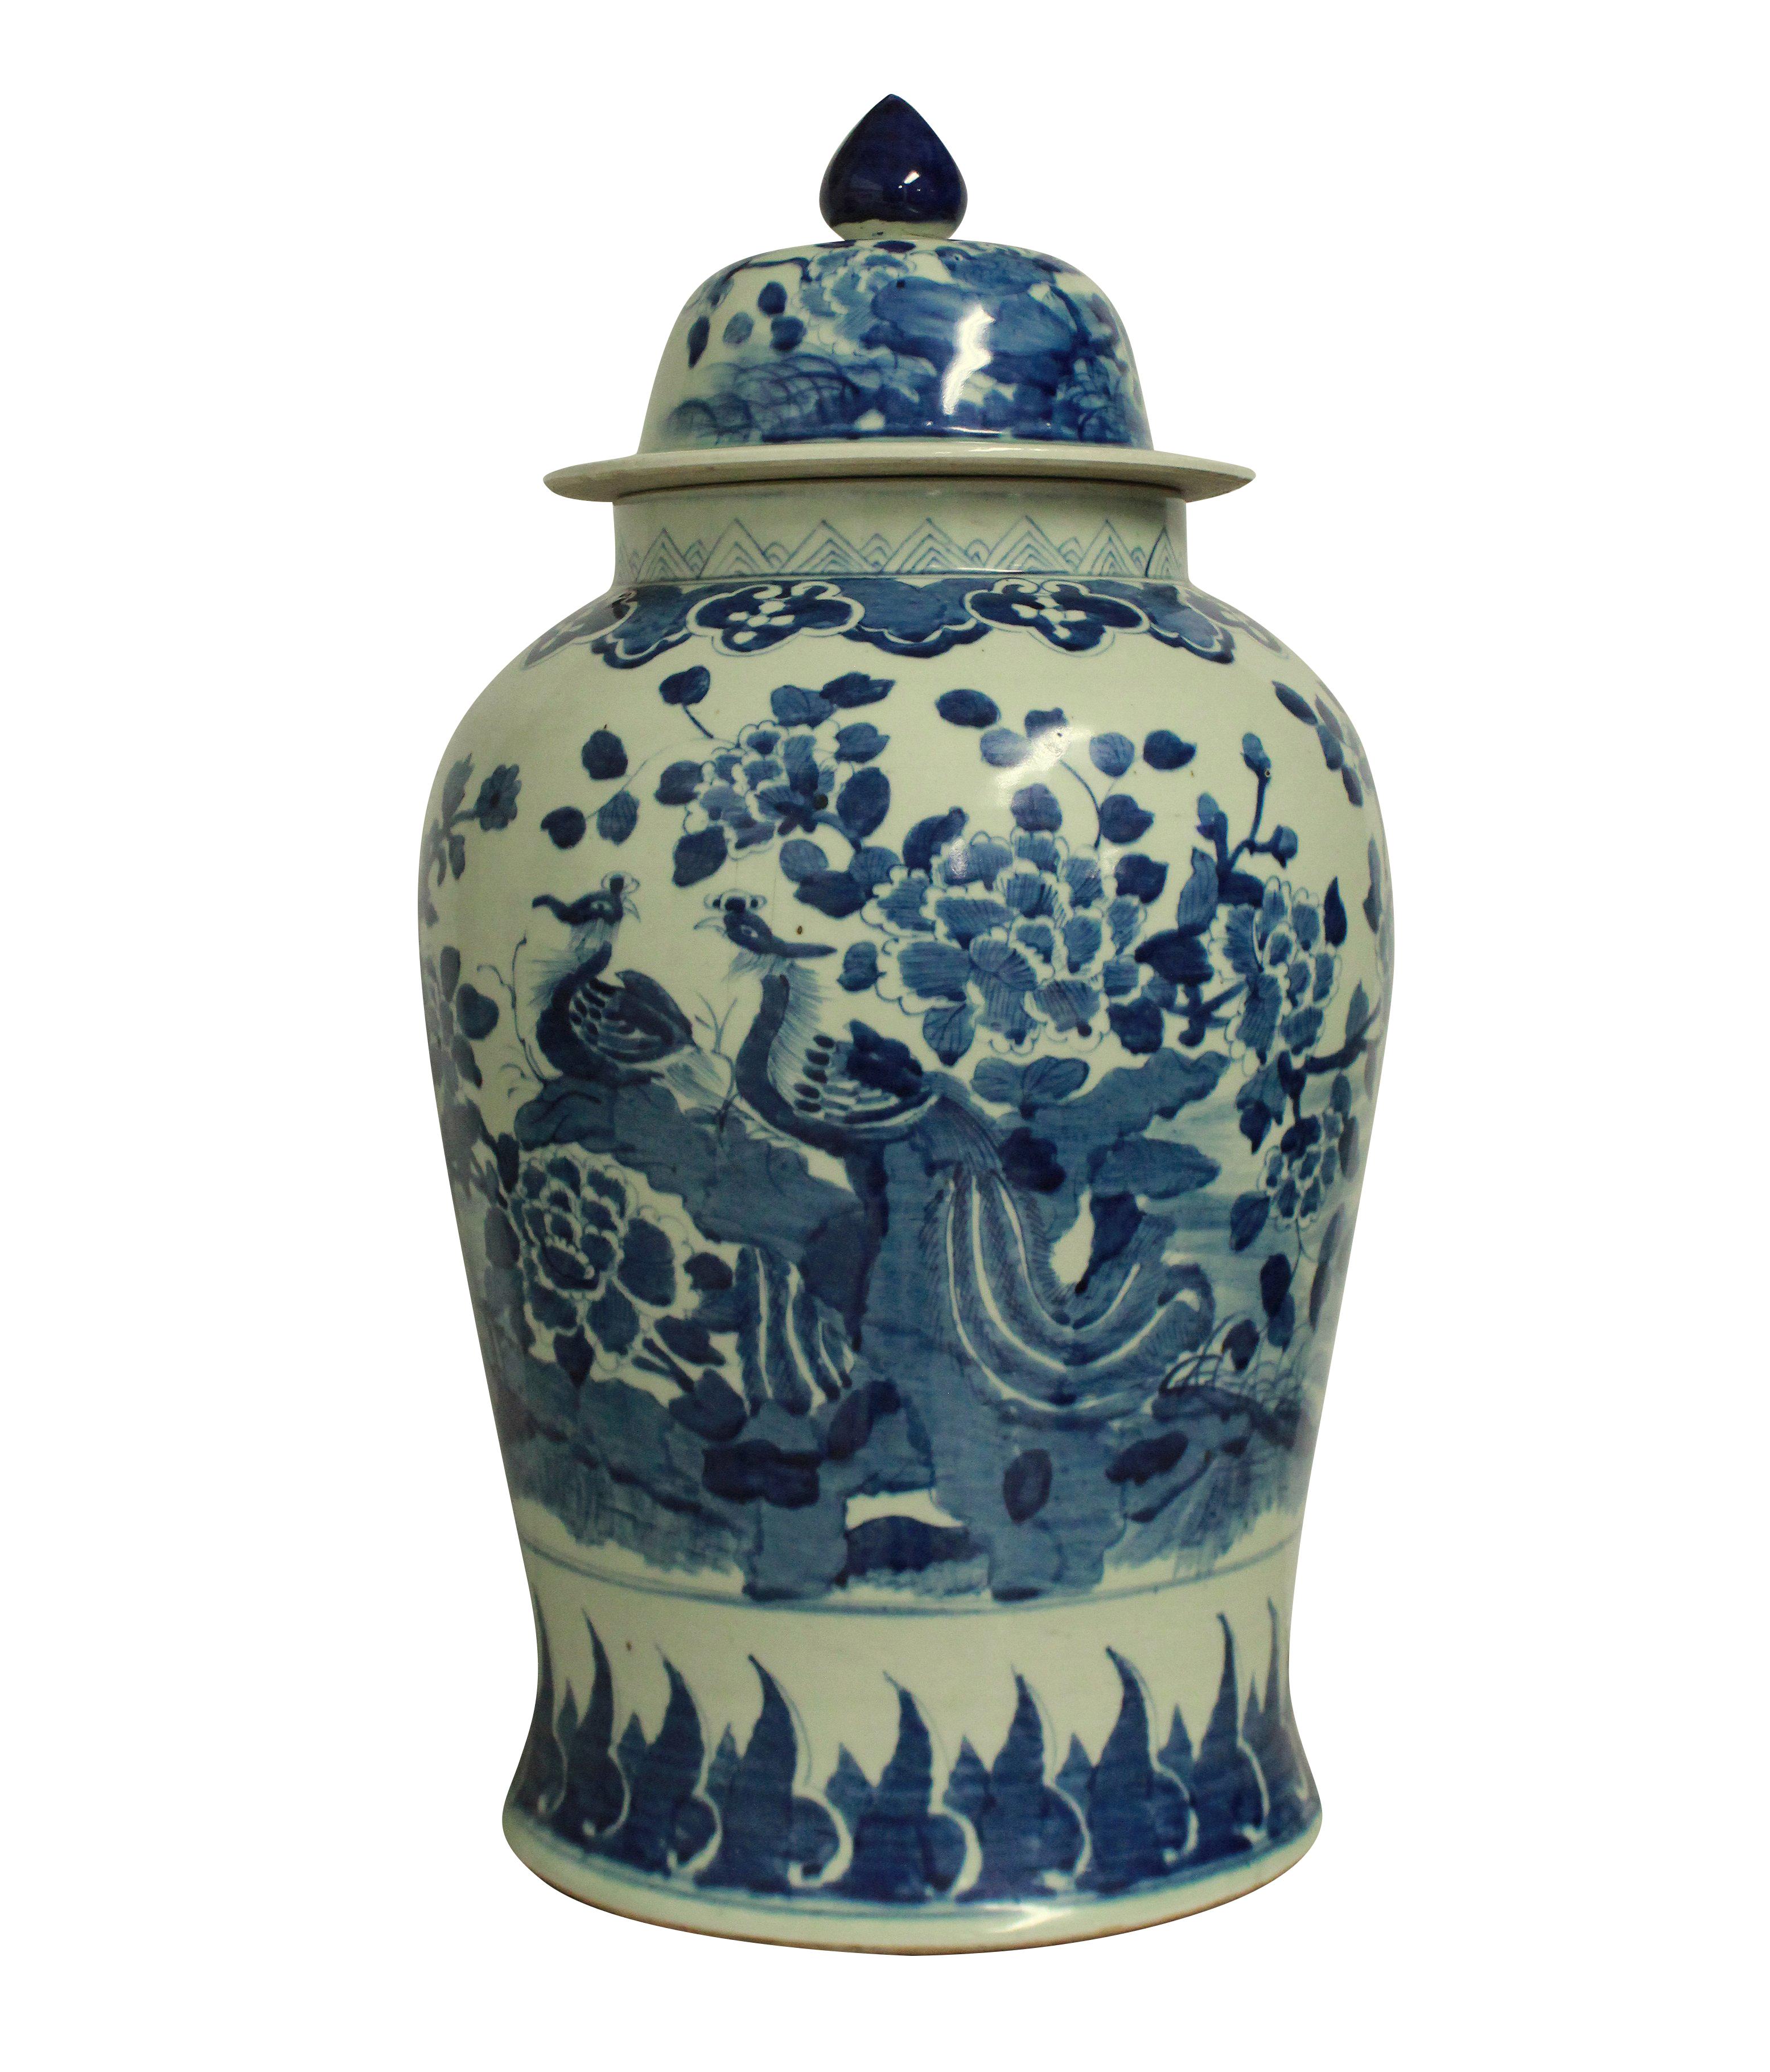 A collection of four large Chinese blue and white porcelain vases with covers. One with ground gold detailing.
Measures: 53cm high x 46cm high x 62cm high x 30cm diameter (largest).